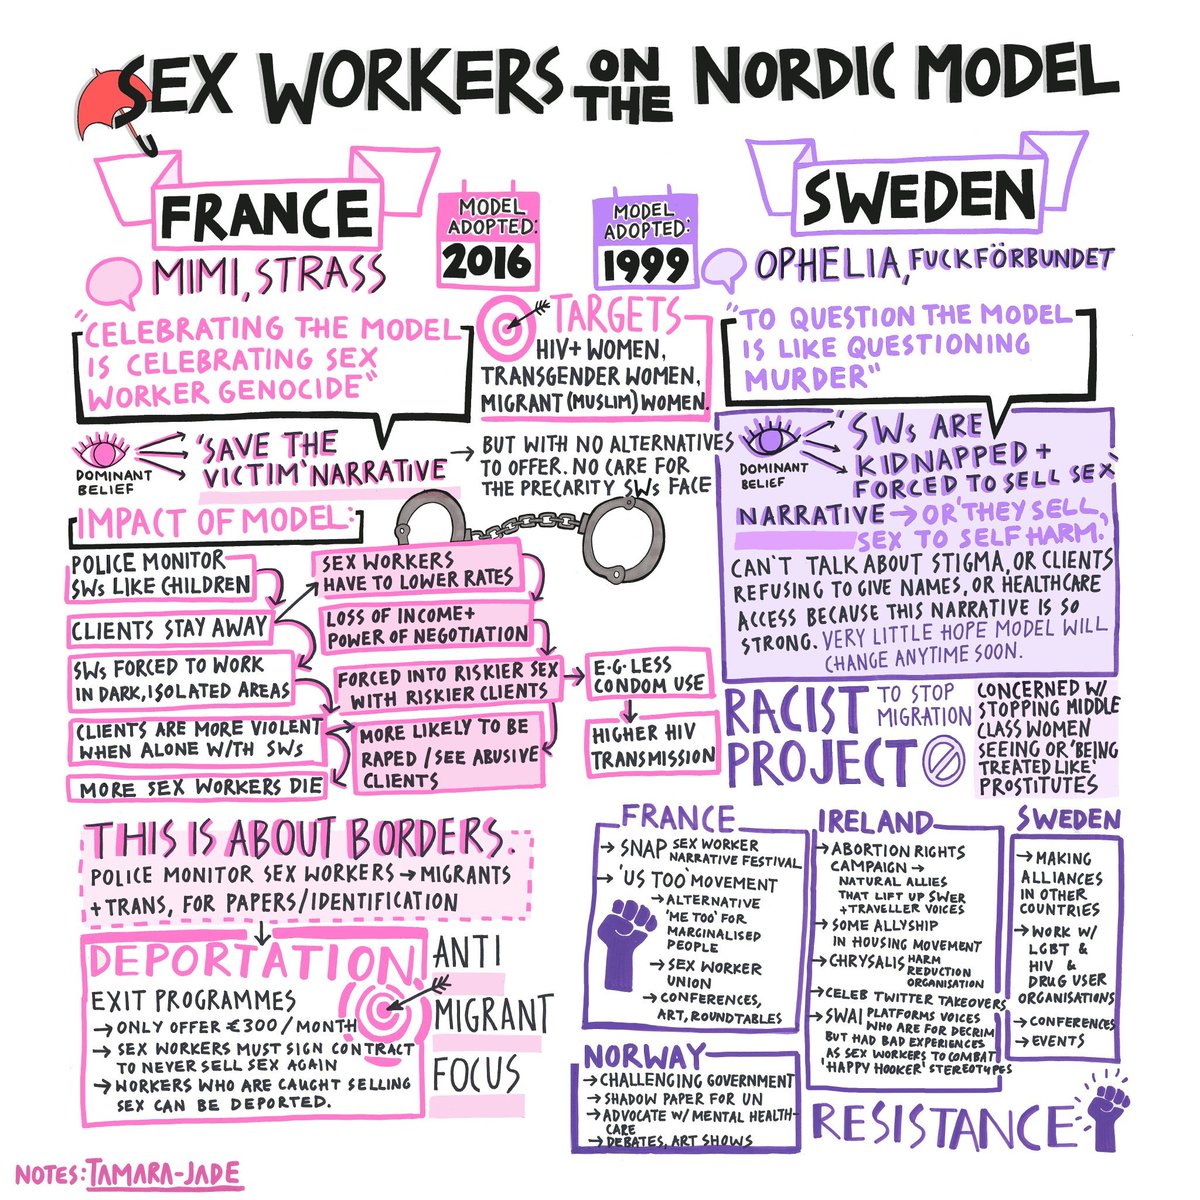 Brilliant snapshot of the Nordic Model and the impacts. Thank you @SexWorkHive and Tamara-Jade for these. I used these in a presentation in Ireland recently to demonstrate how the NM impacts infectious diseases and reluctance of sex workers to disclose and seek equitable care.